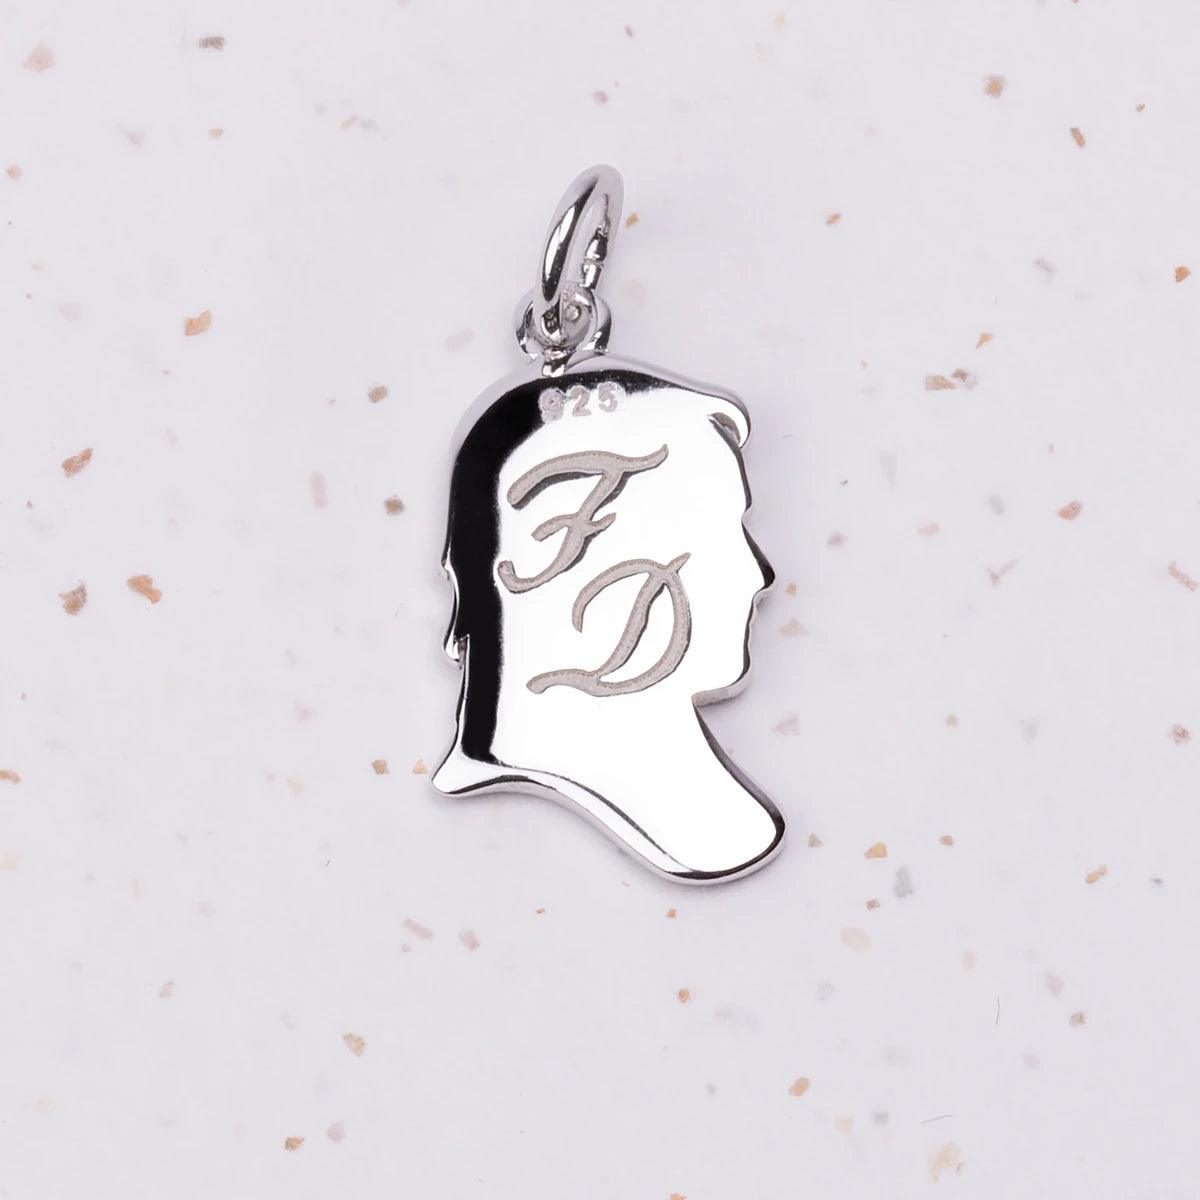 Mr. Darcy Inscribed Silhouette Charm